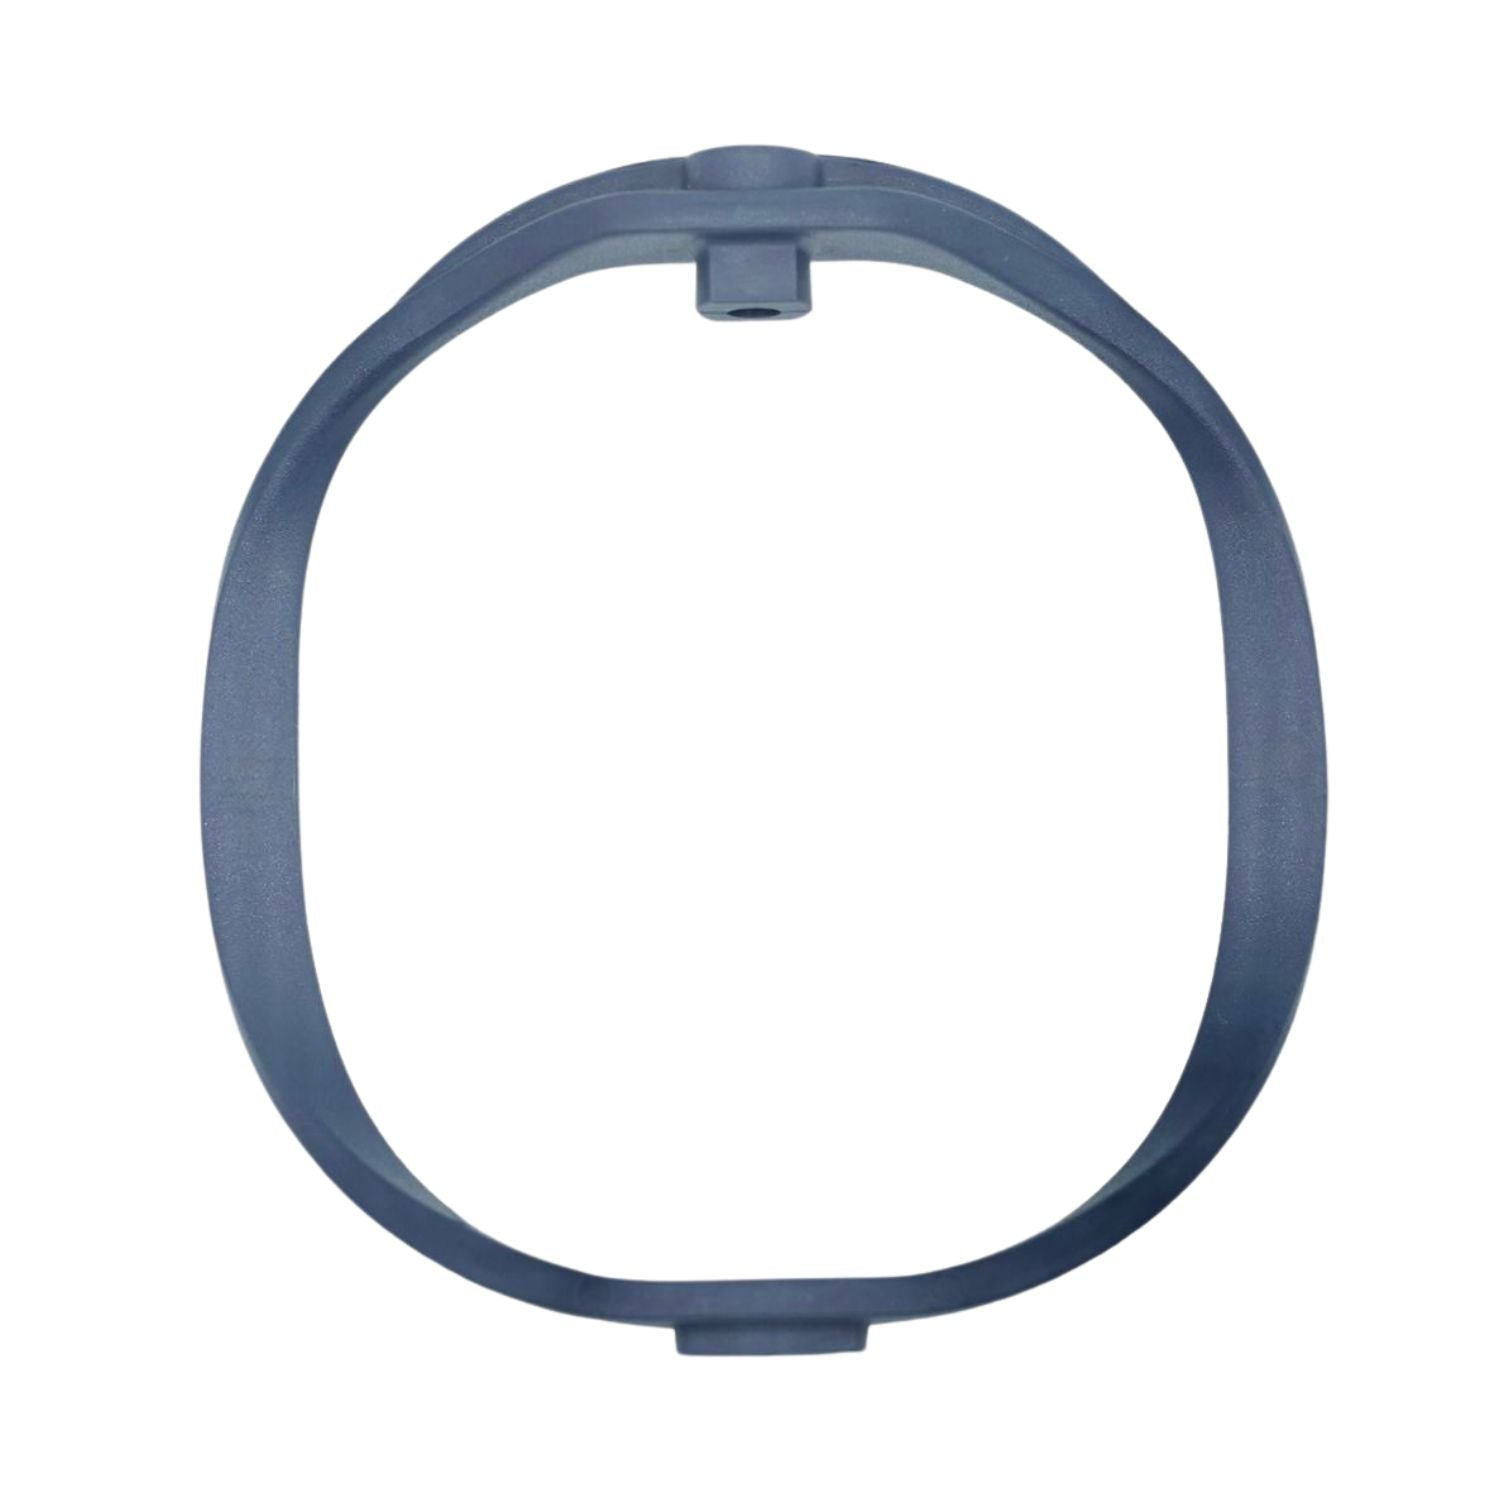 Pair of RAD-2 Hoops, Extra Firm 82-Shore (Dark Blue - Hoops Only)